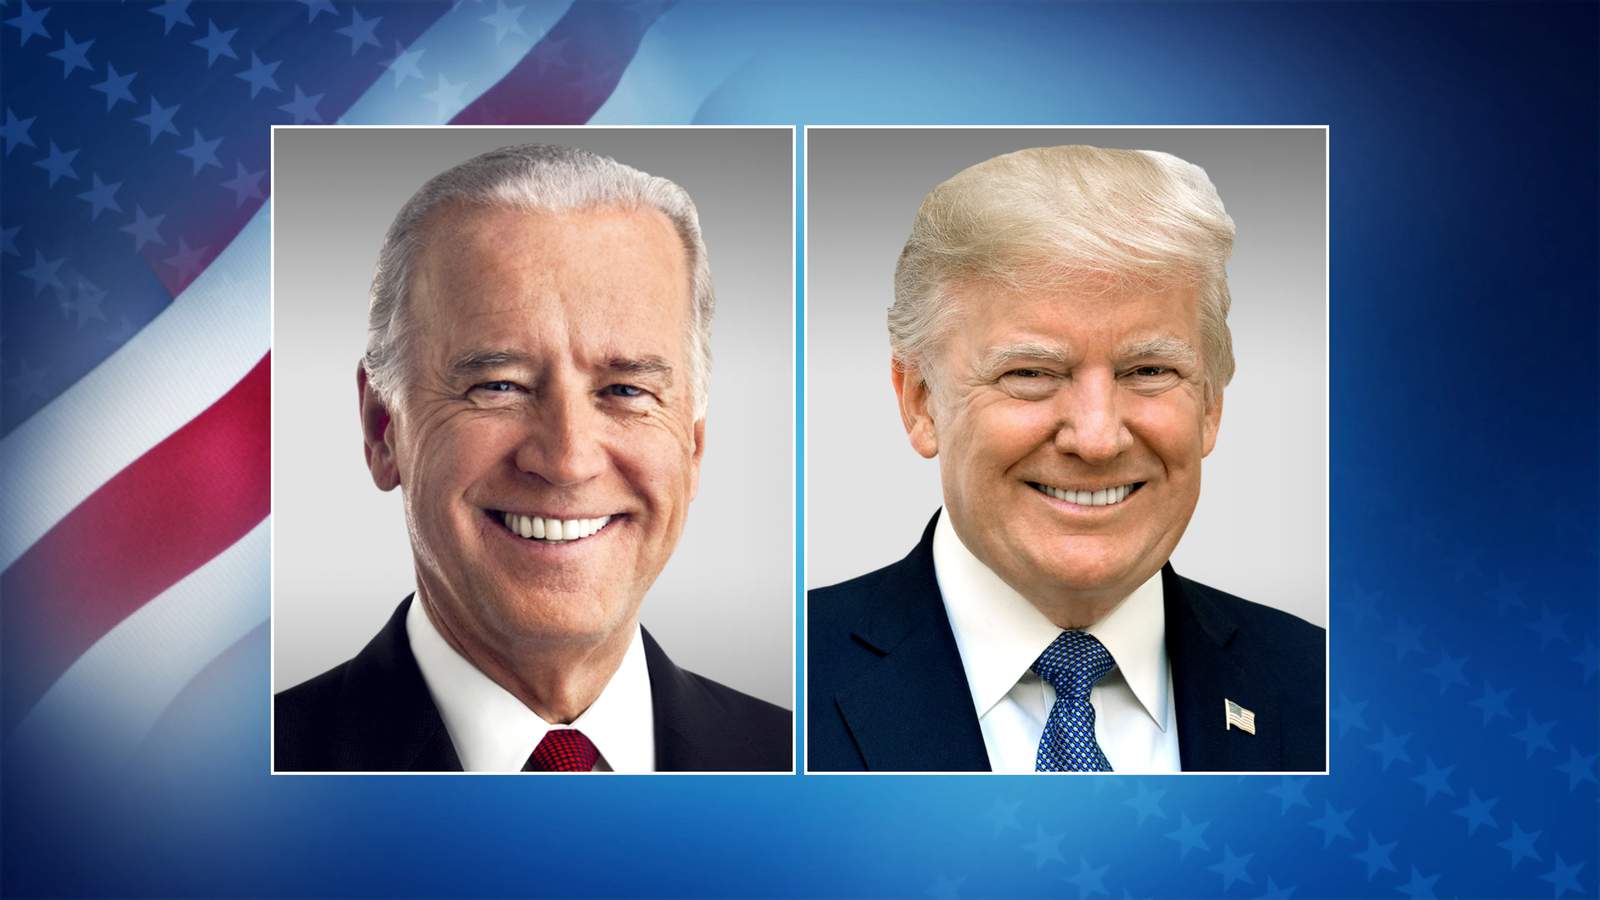 Election results 2020: Donald Trump vs. Joe Biden: Where the presidential race stands right now